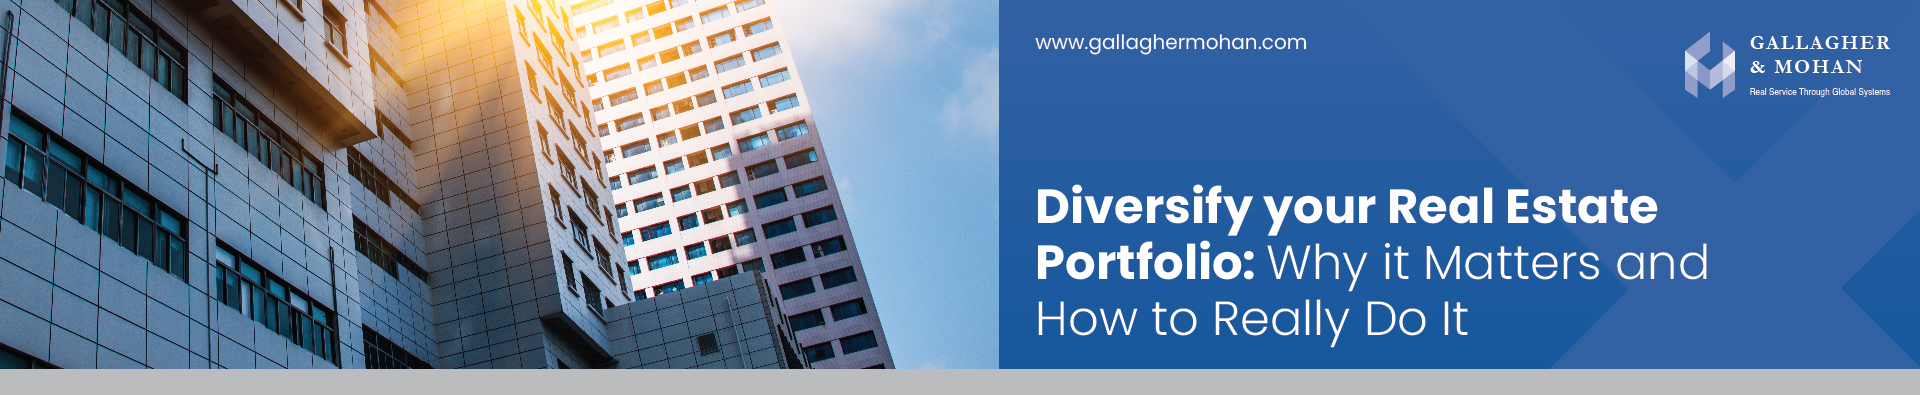 Diversify Your Real Estate Portfolio Why It Matters And How To Really Do It